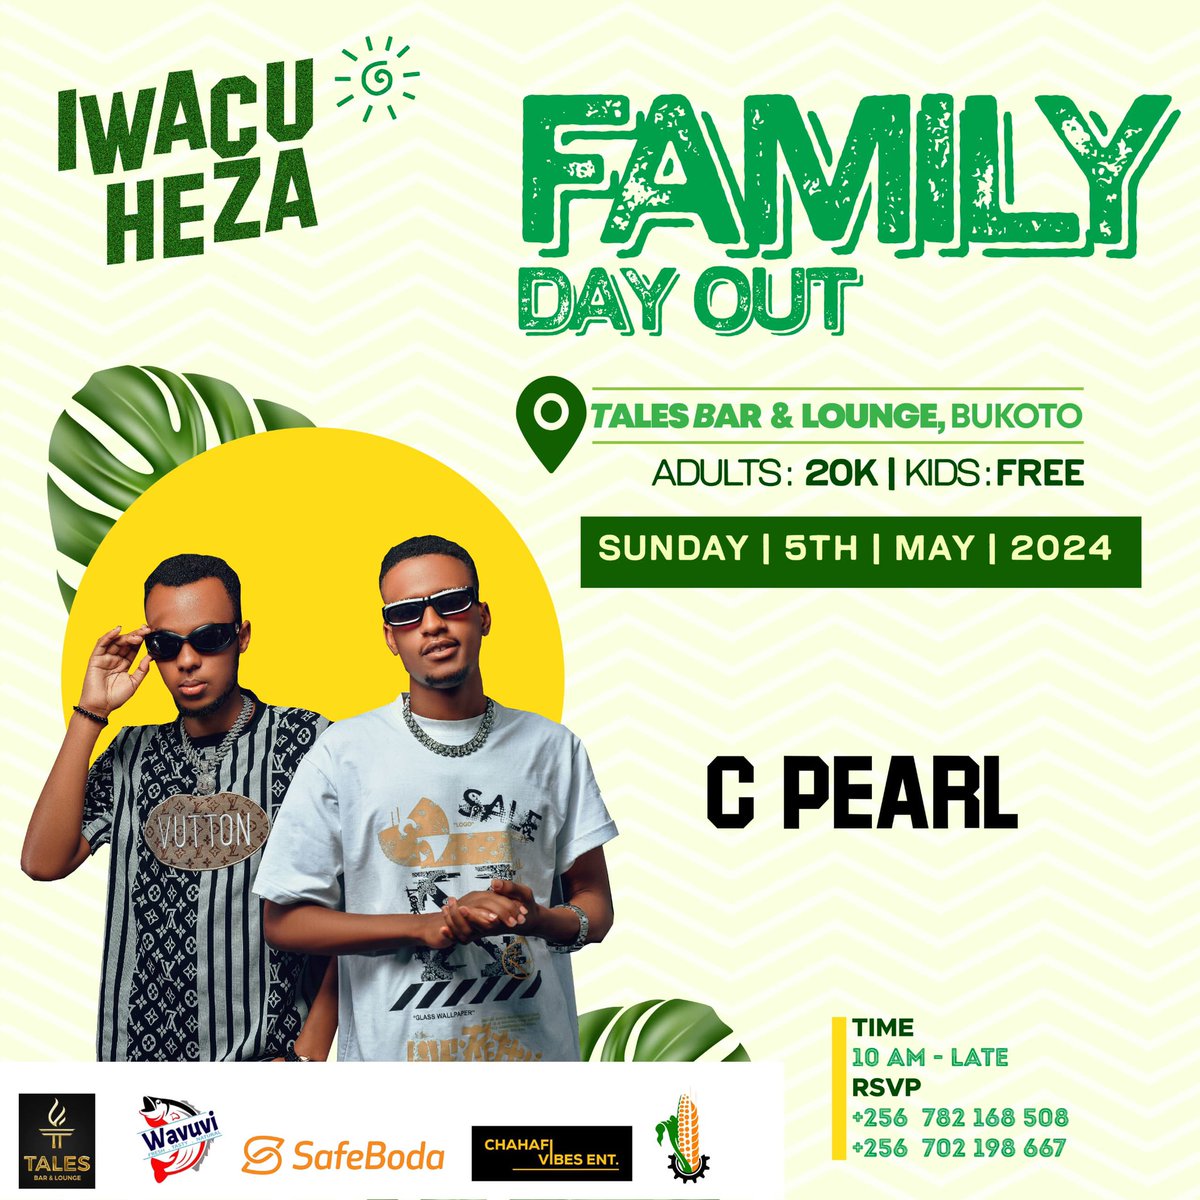 Artistes //

Don’t miss out on the fun, bring those kids too

#IwacuHeza
#FamilyDayOut